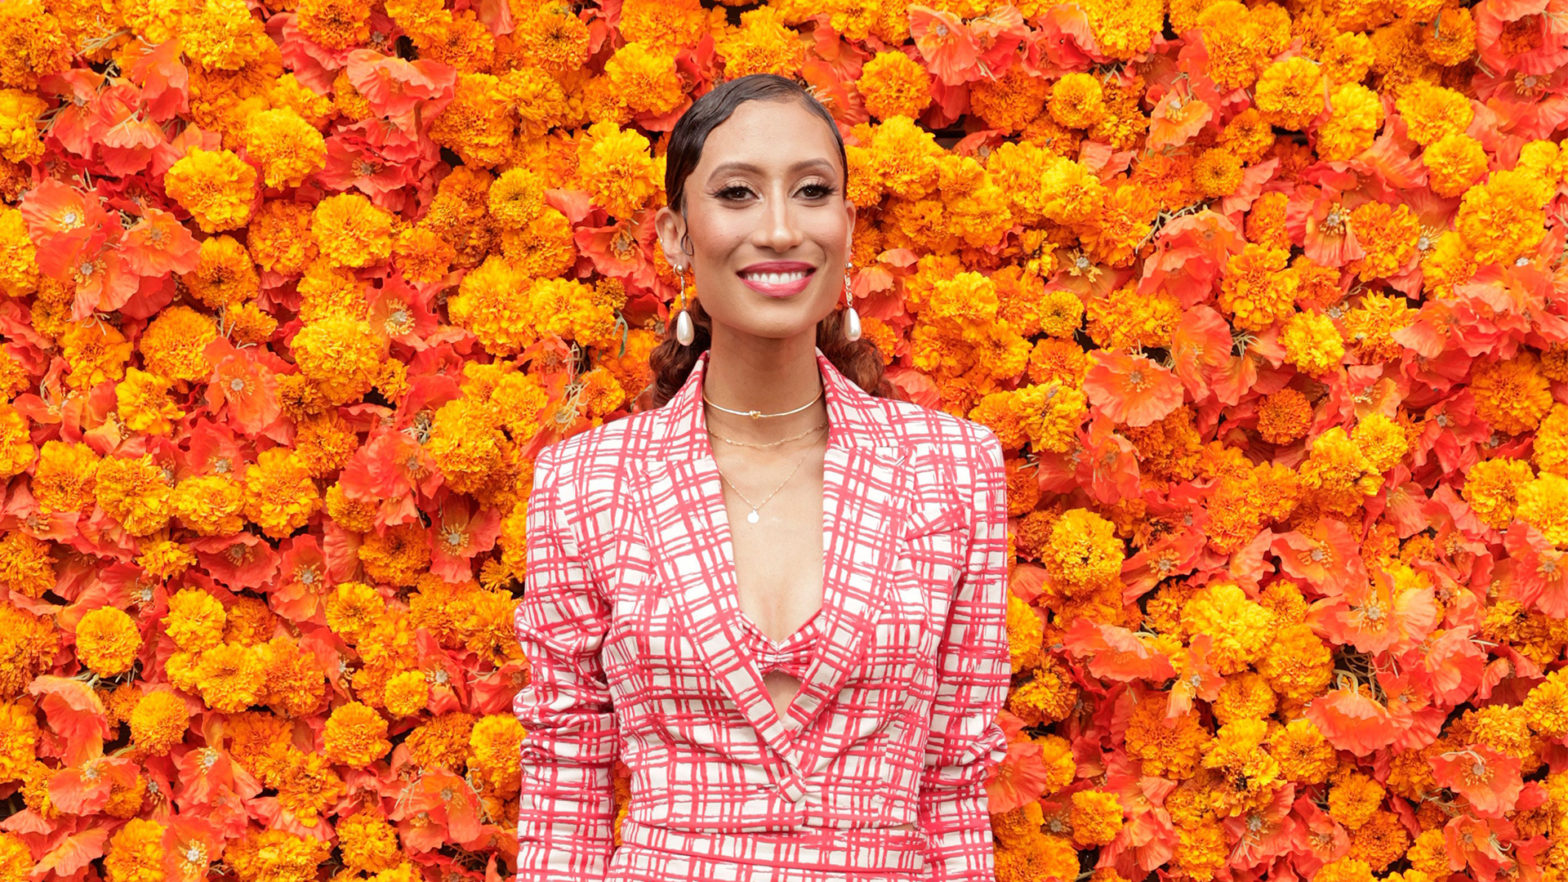 Elaine Welteroth Joins Forces With Public To Help Black Women Get Into The Game Of Investing